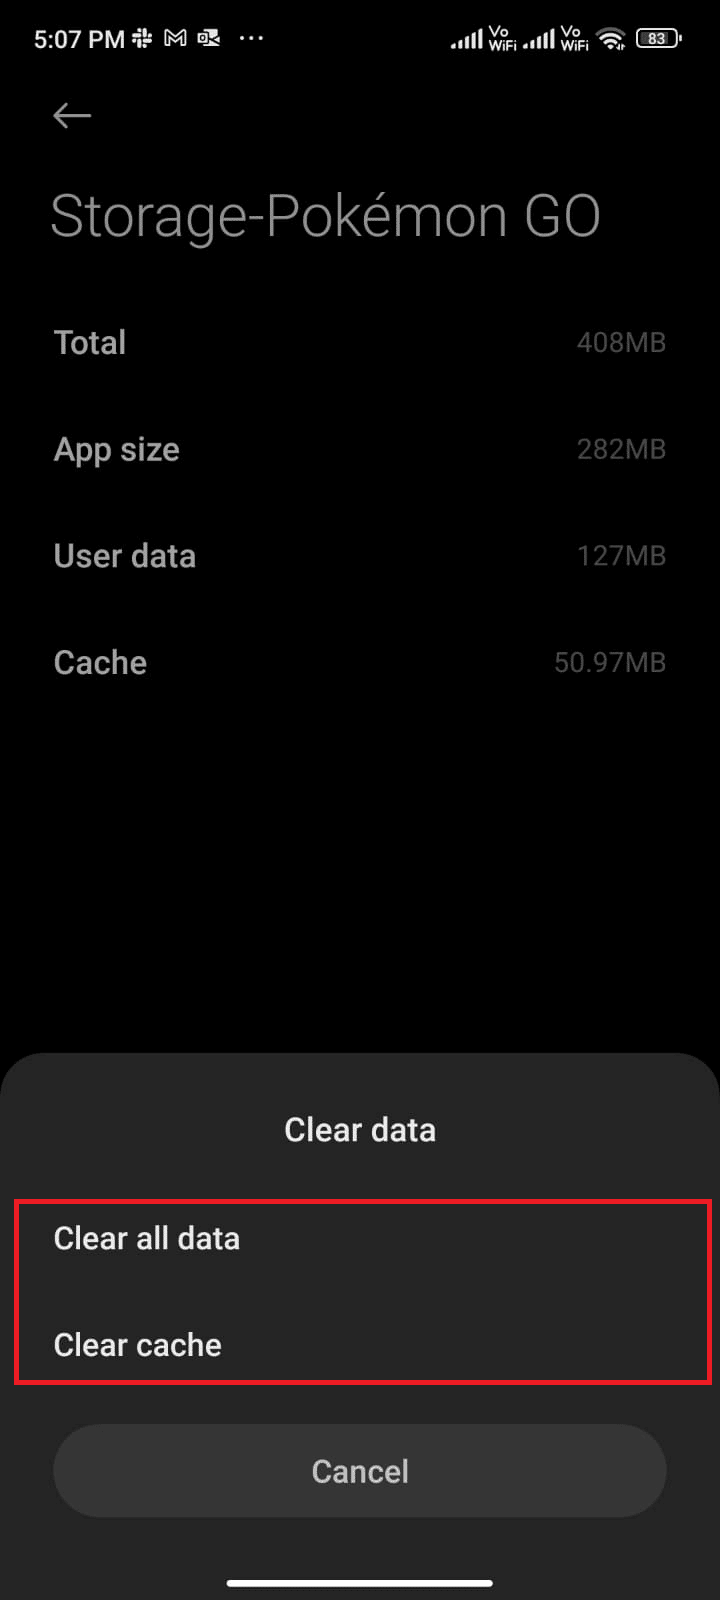 Then, tap Clear cache